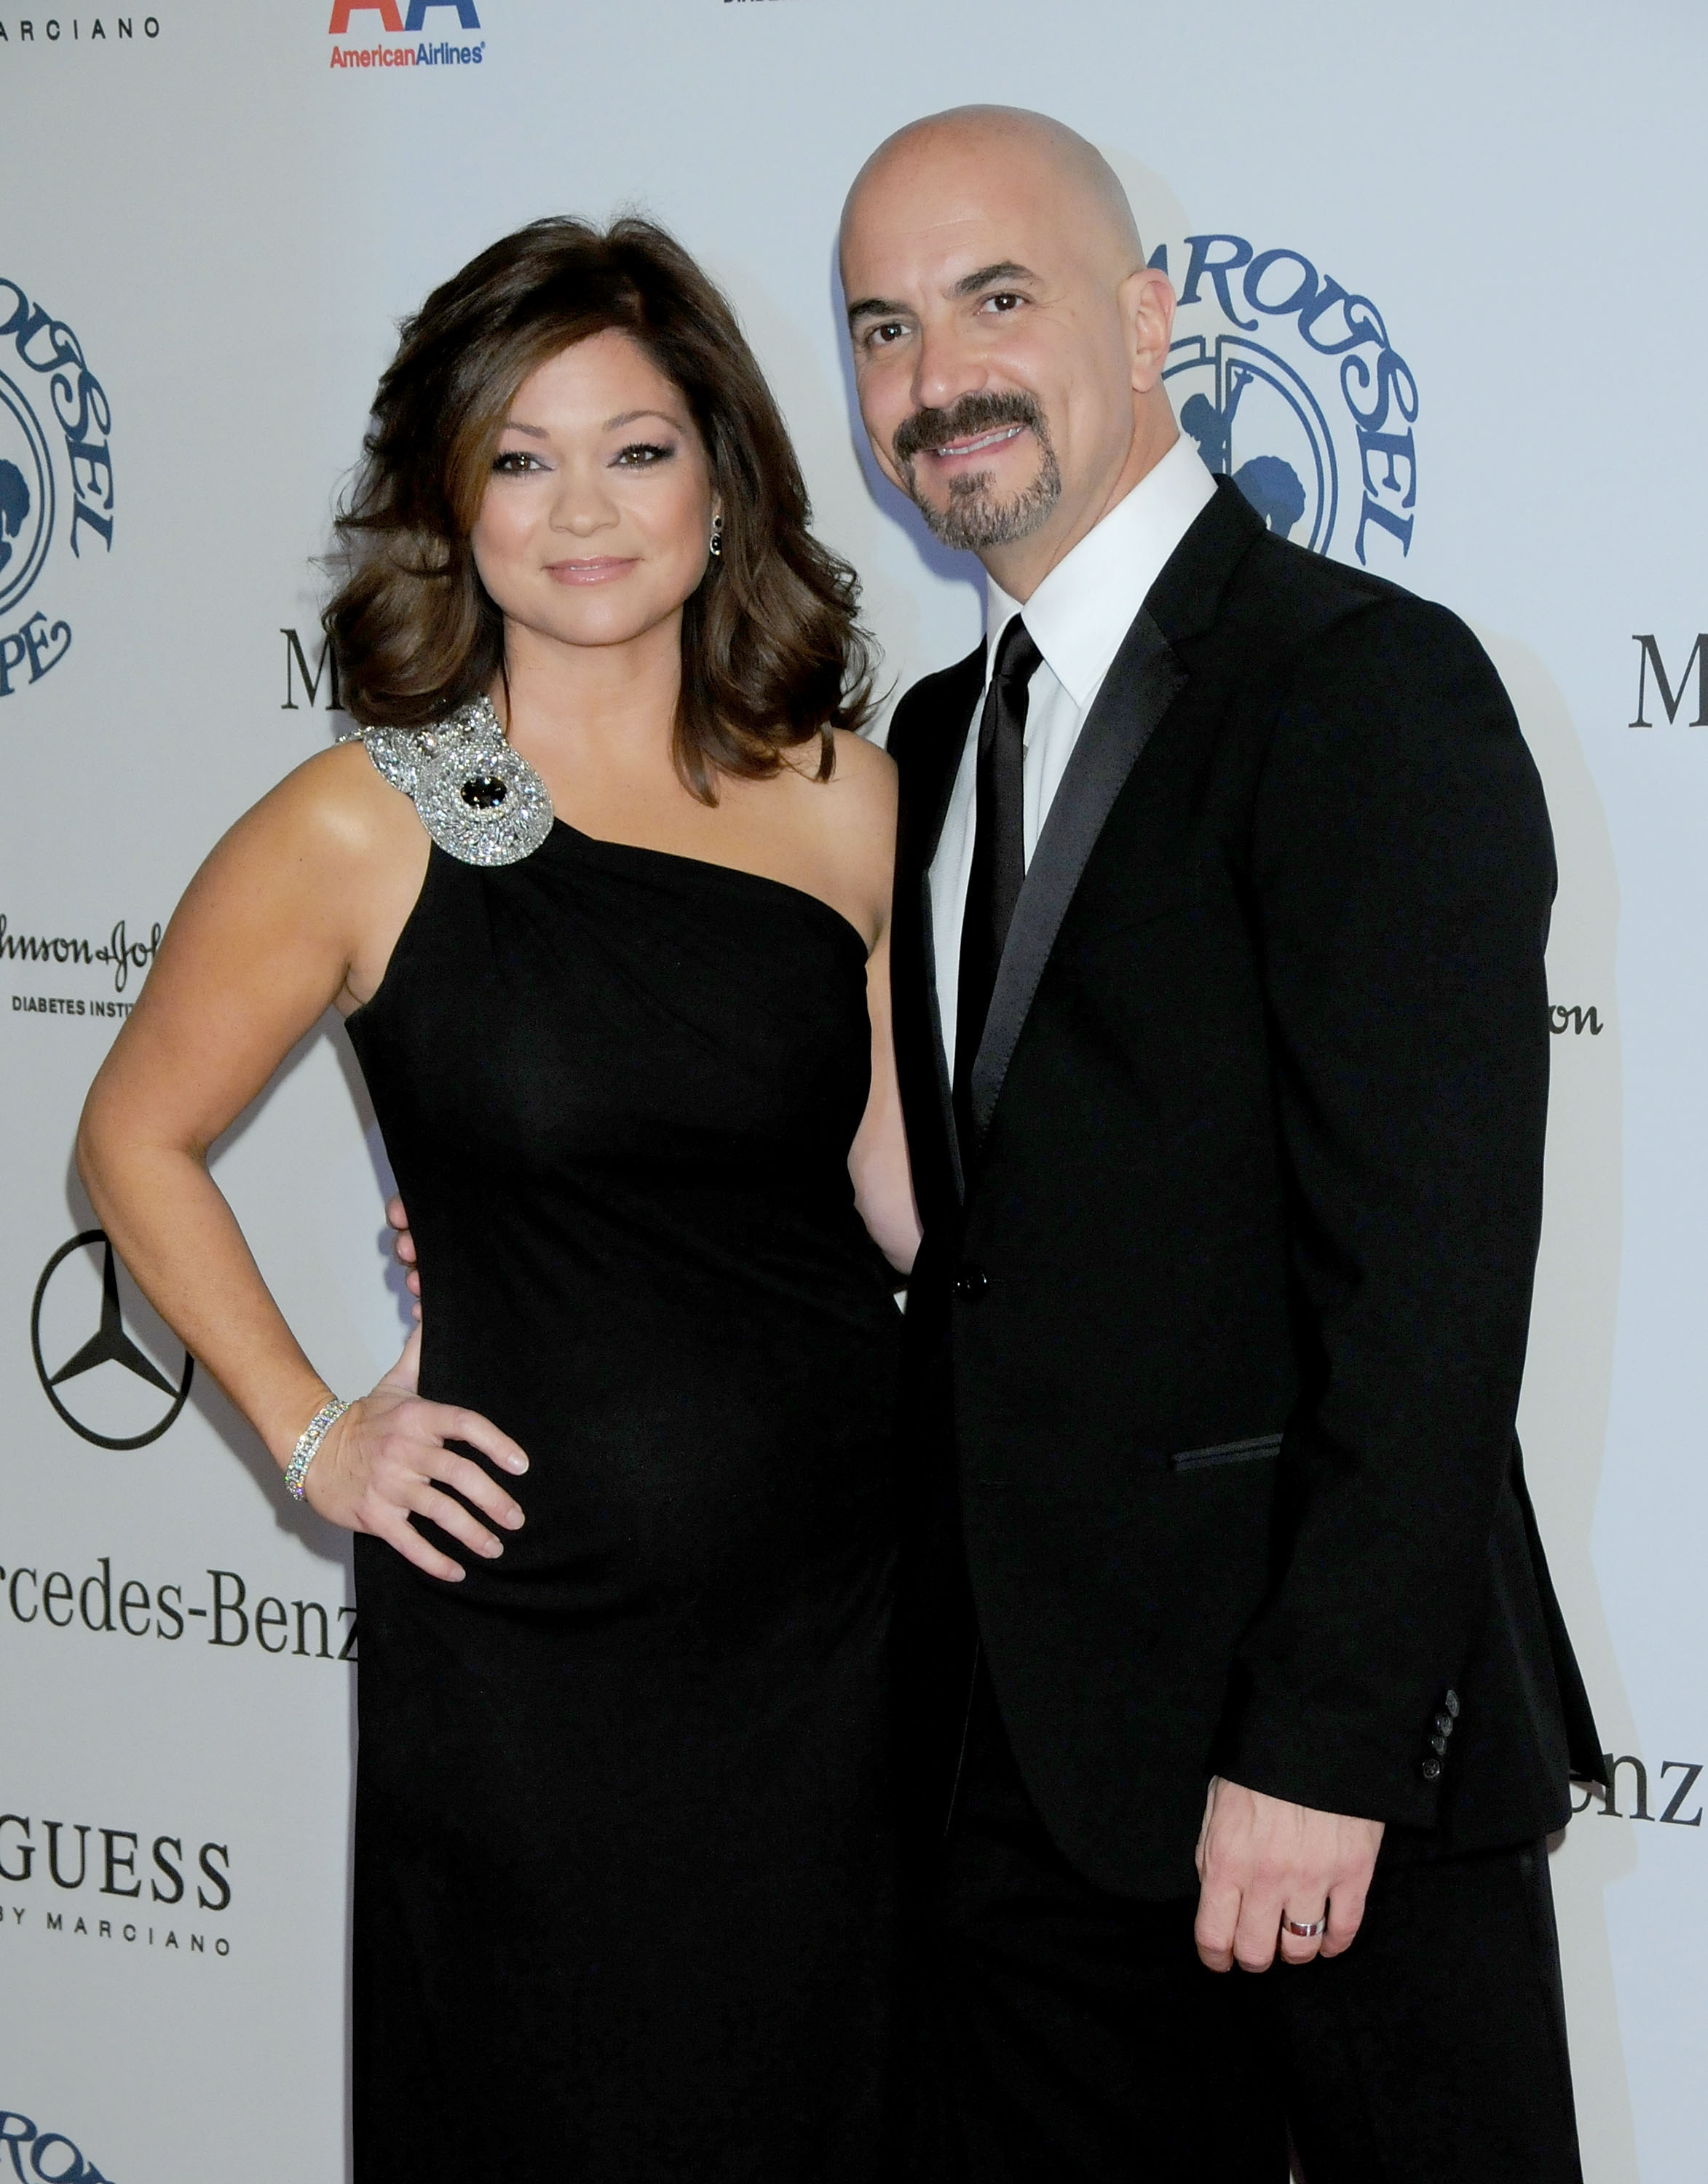 Actress Valerie Bertinelli and Tom Vitale pictured upon arrival at The 30th Anniversary Carousel Of Hope Ball at The Beverly Hilton Hotel on October 25, 2008 in Beverly Hills, California. | Source: Getty Images